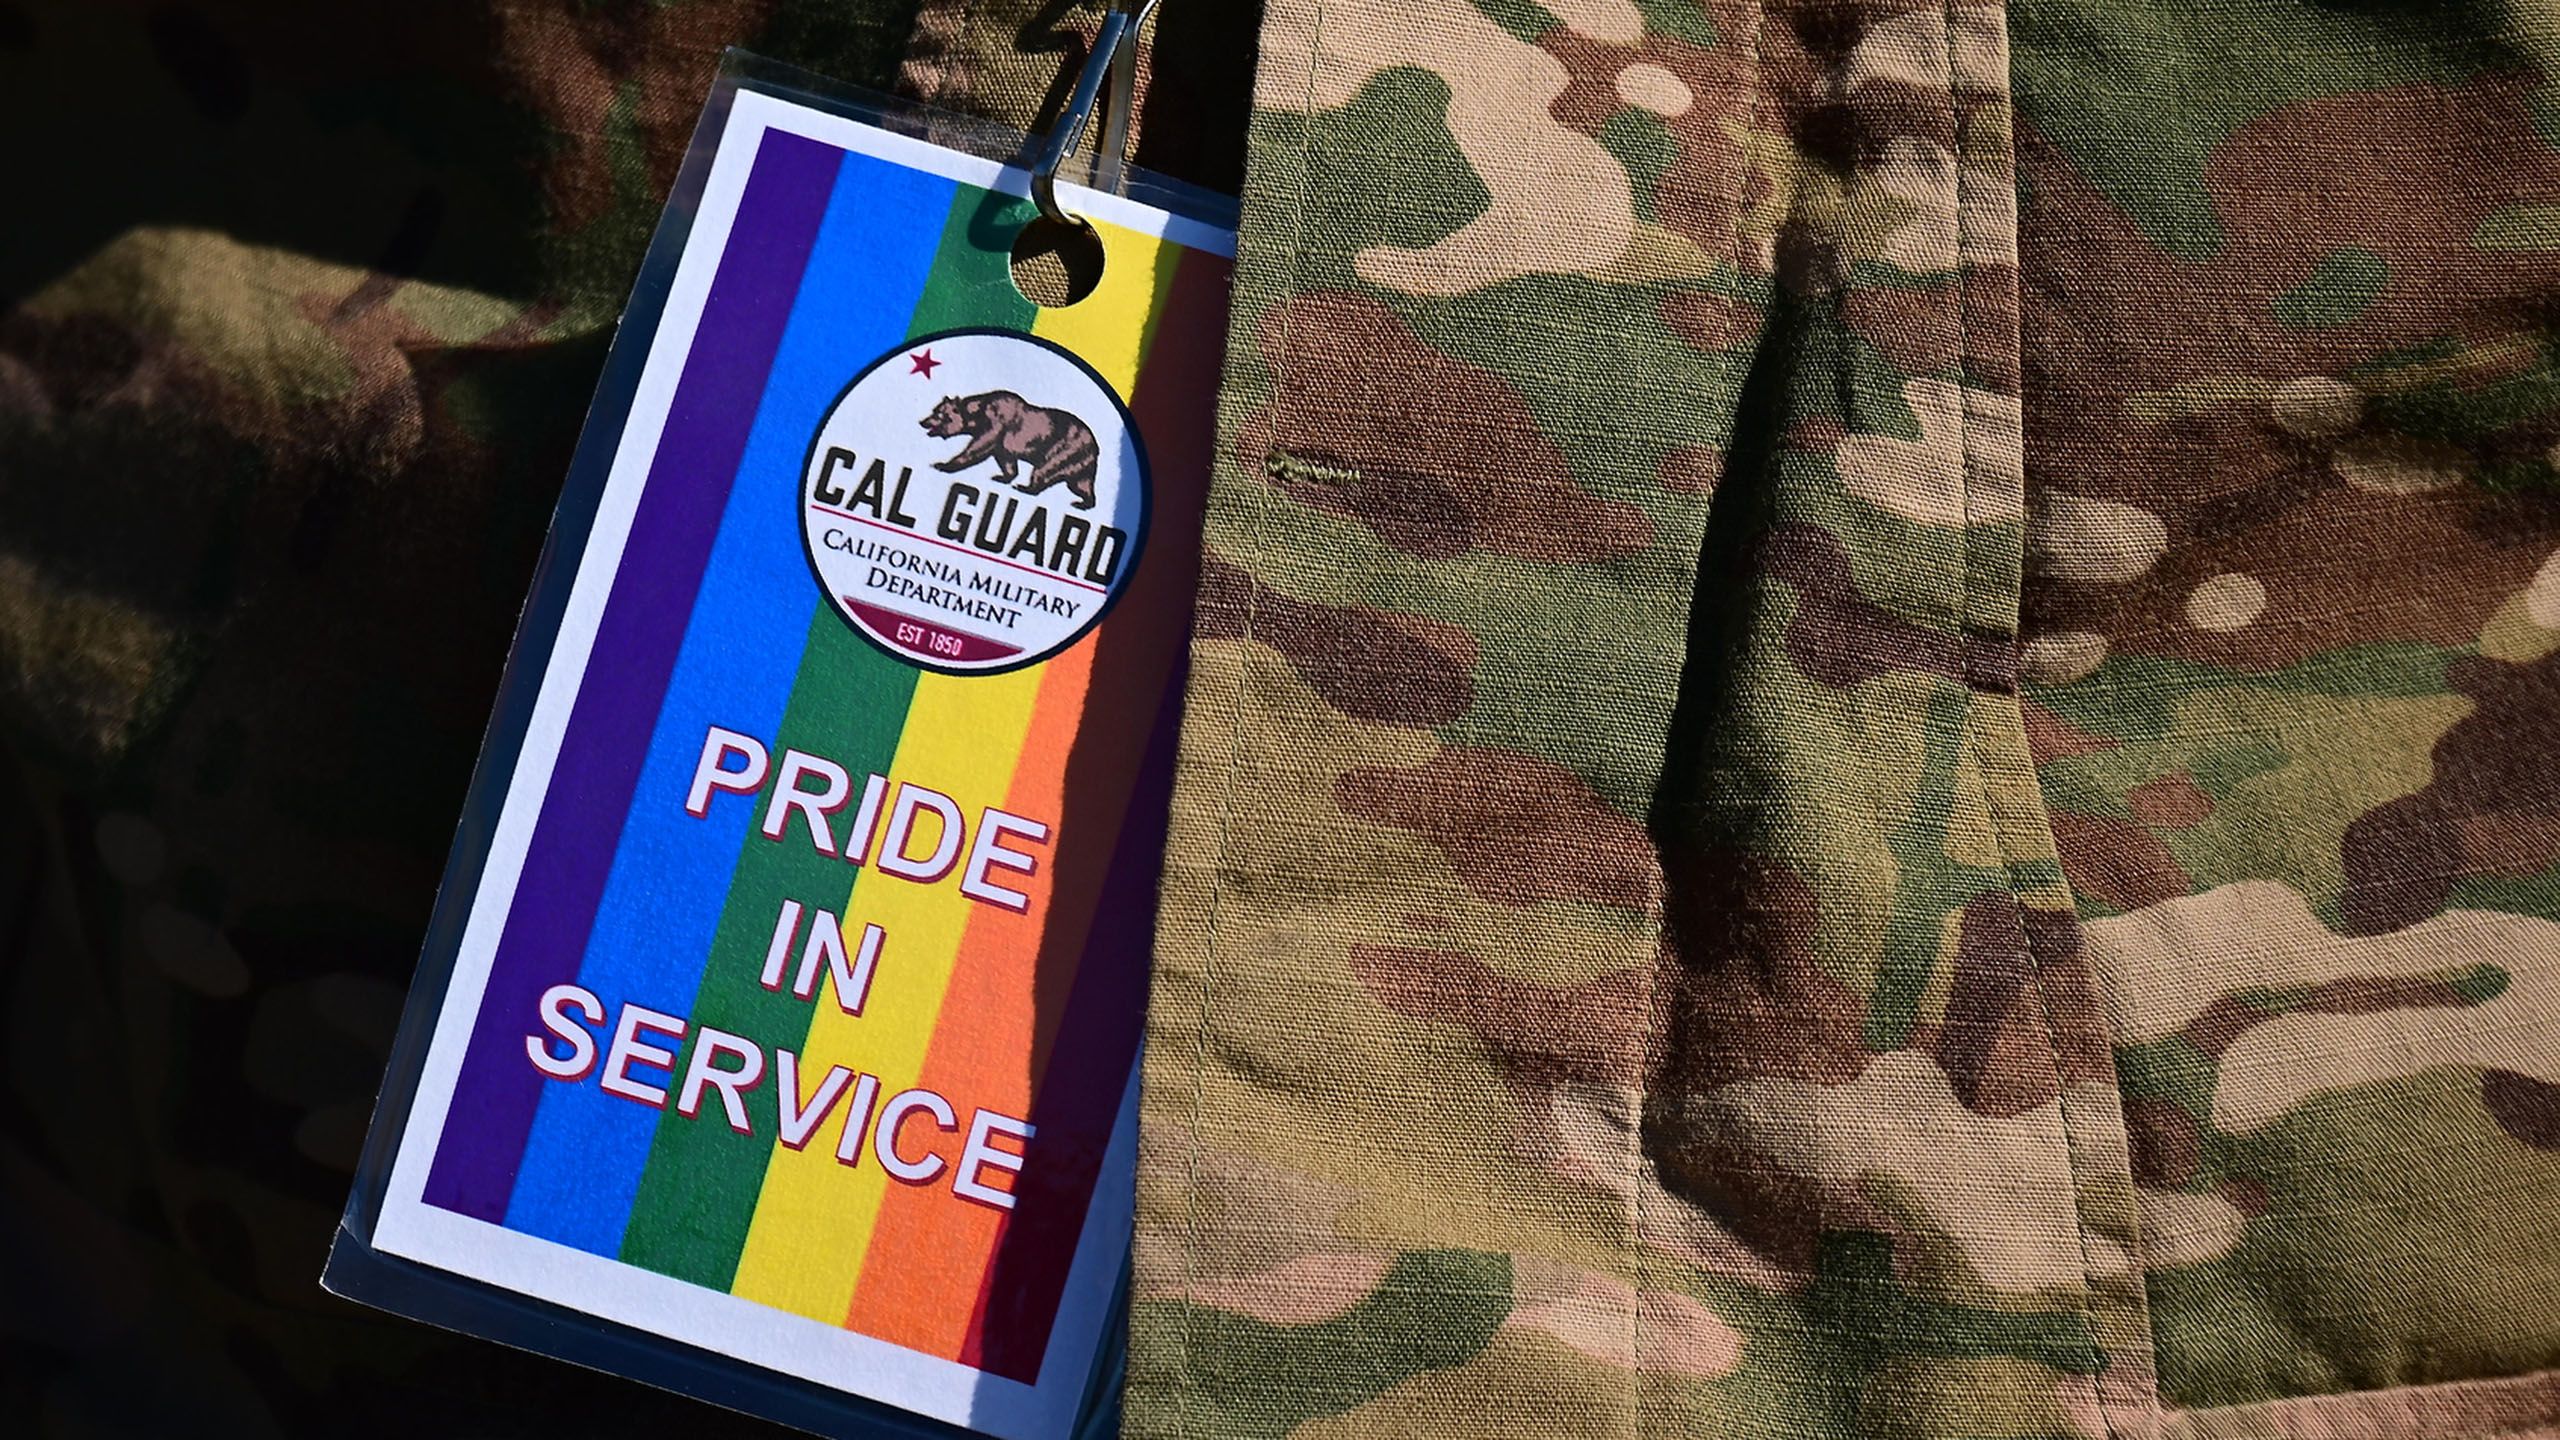 Colorful badge on lanyard reads Pride in Service with Cal Guard logo.